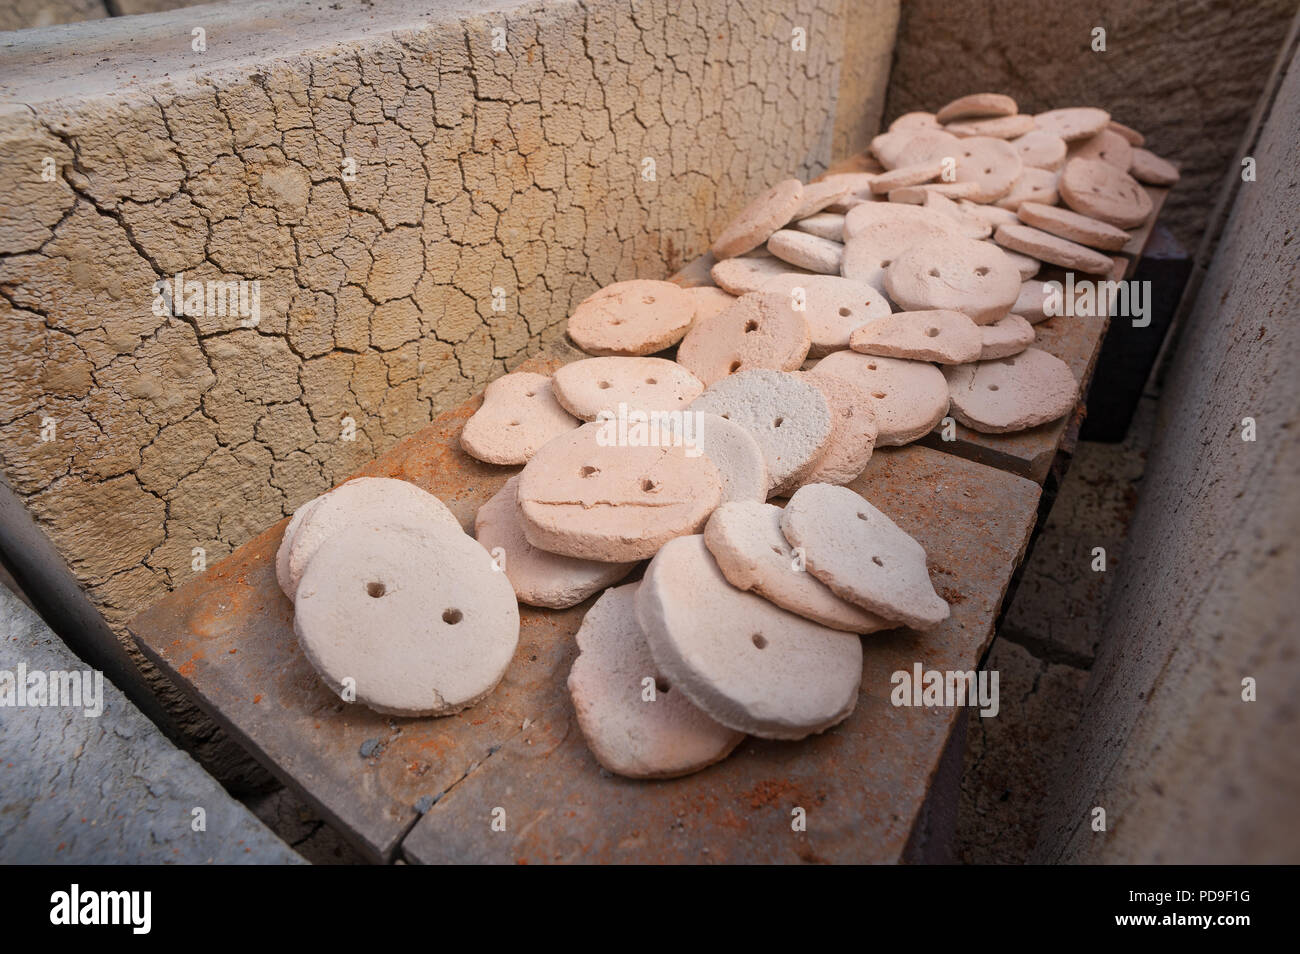 Heat damage caused to thermalite building blocks, biscuit firing clay in kiln with cone 7 causing cracks and scorching of cement, ceramic product Stock Photo